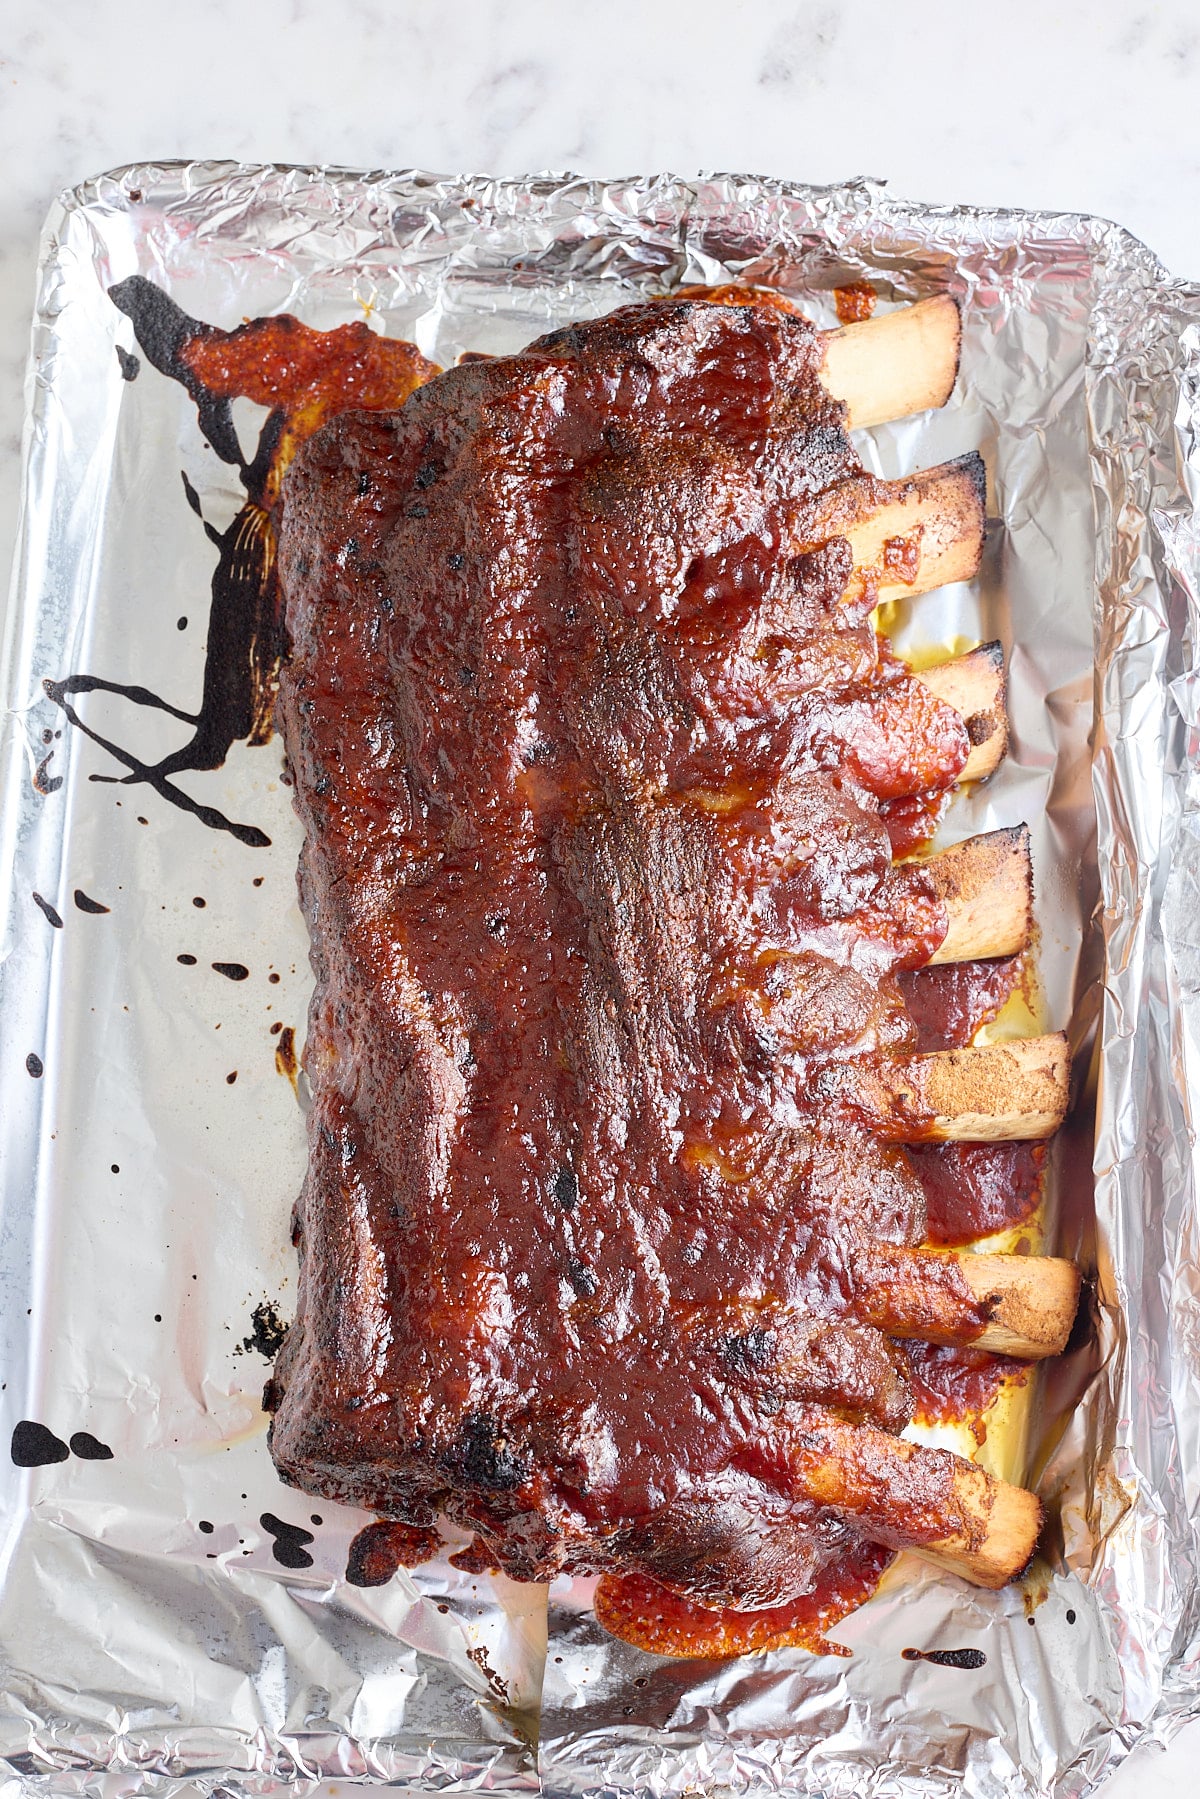 how long does it take for beef ribs to cook